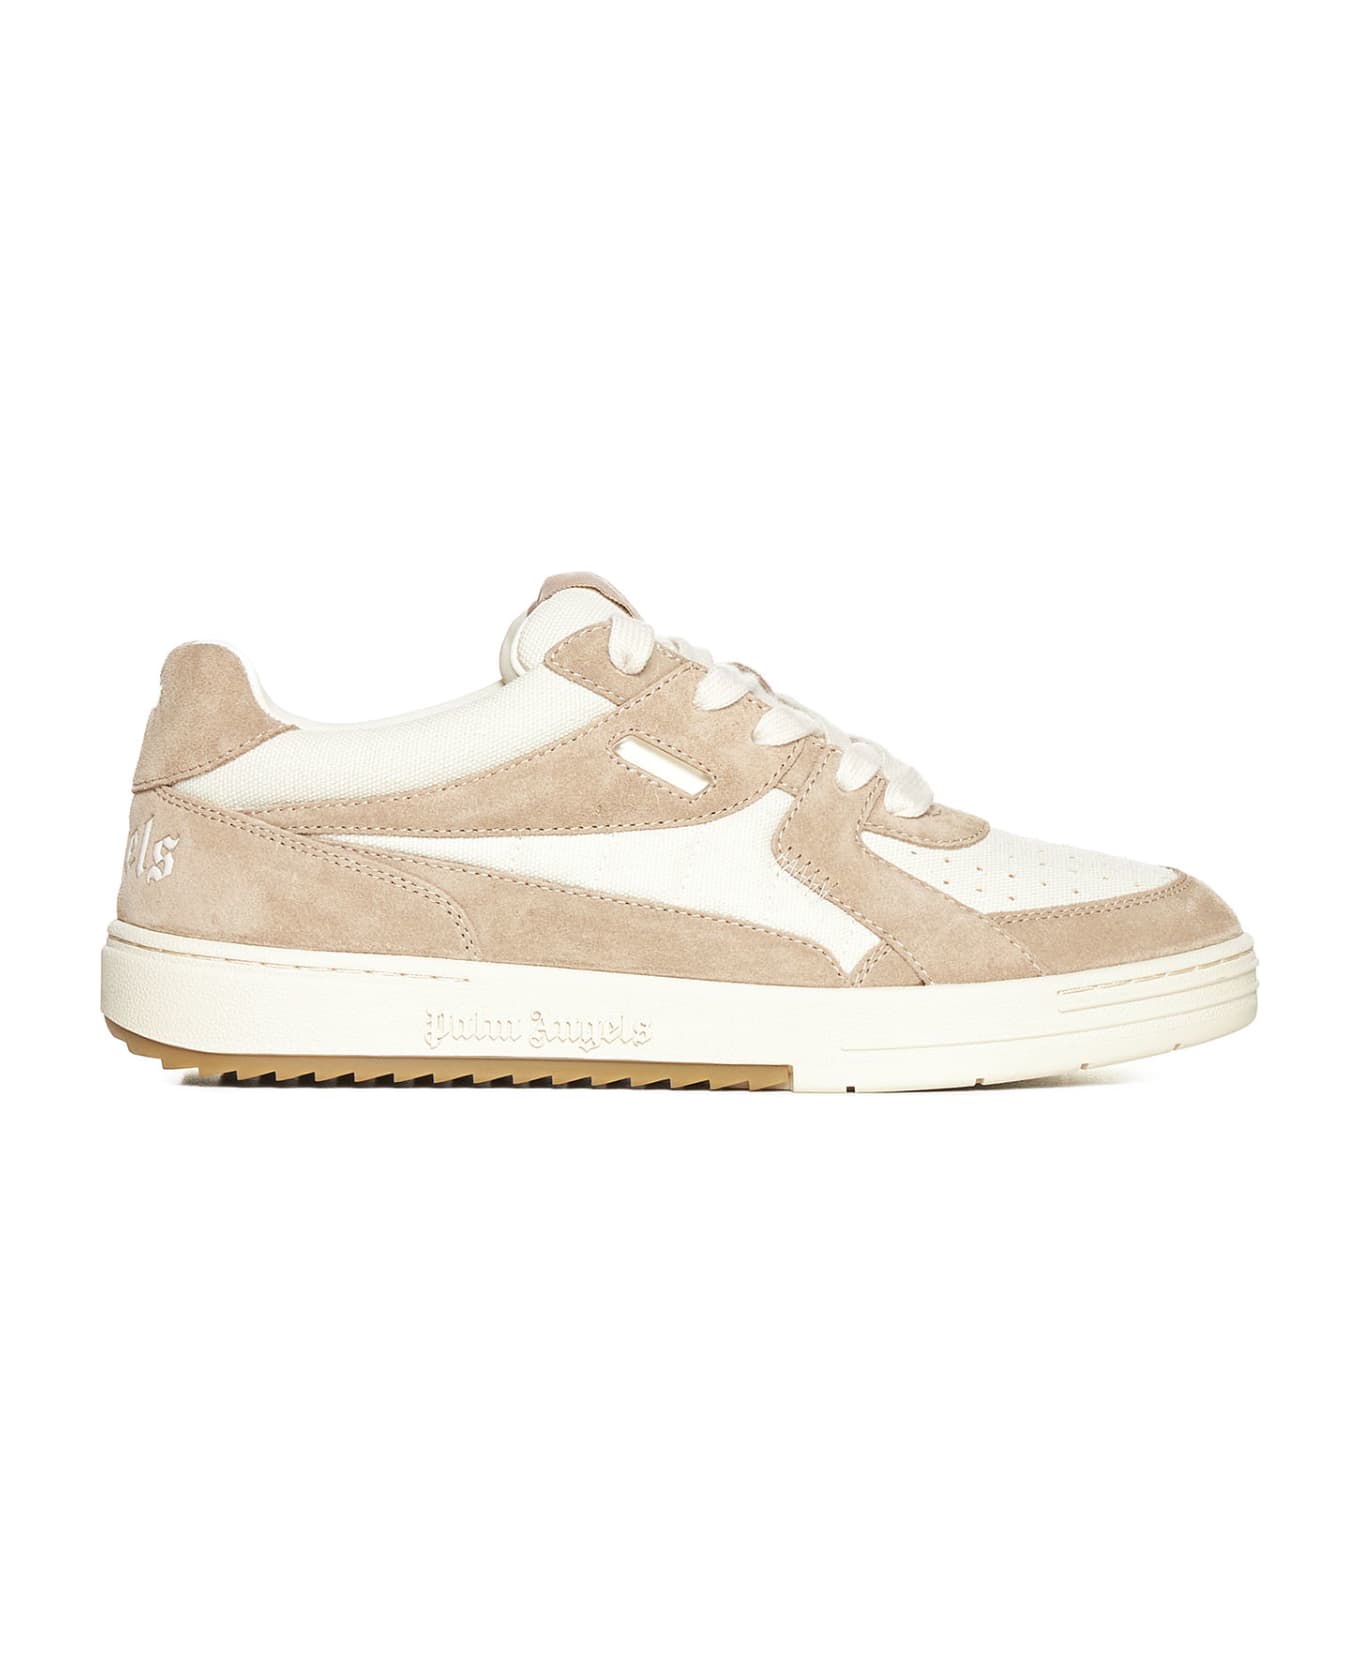 Palm Angels University Sneakers - White camel スニーカー